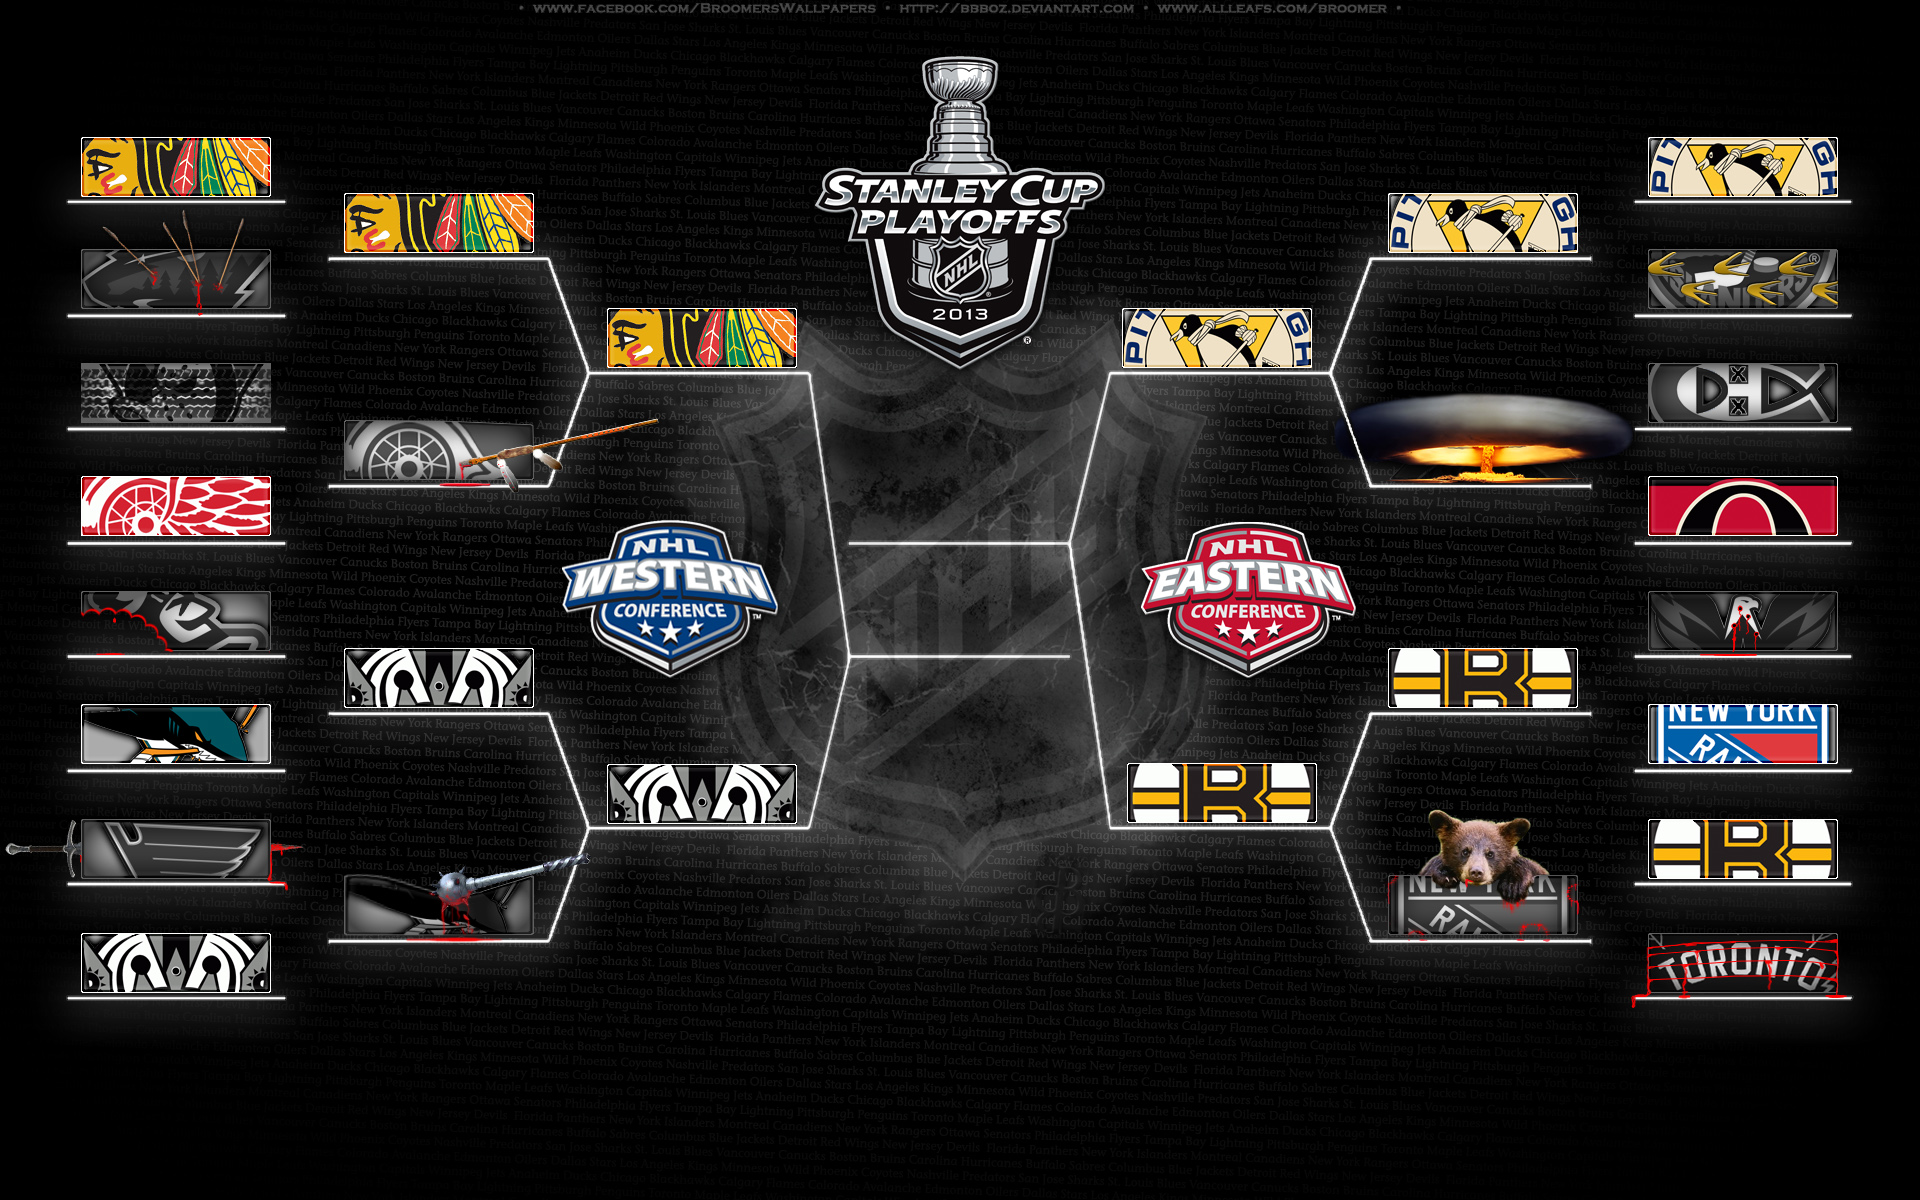 2013 Playoff Bracket 3rd Round By Bbboz D6746rb 